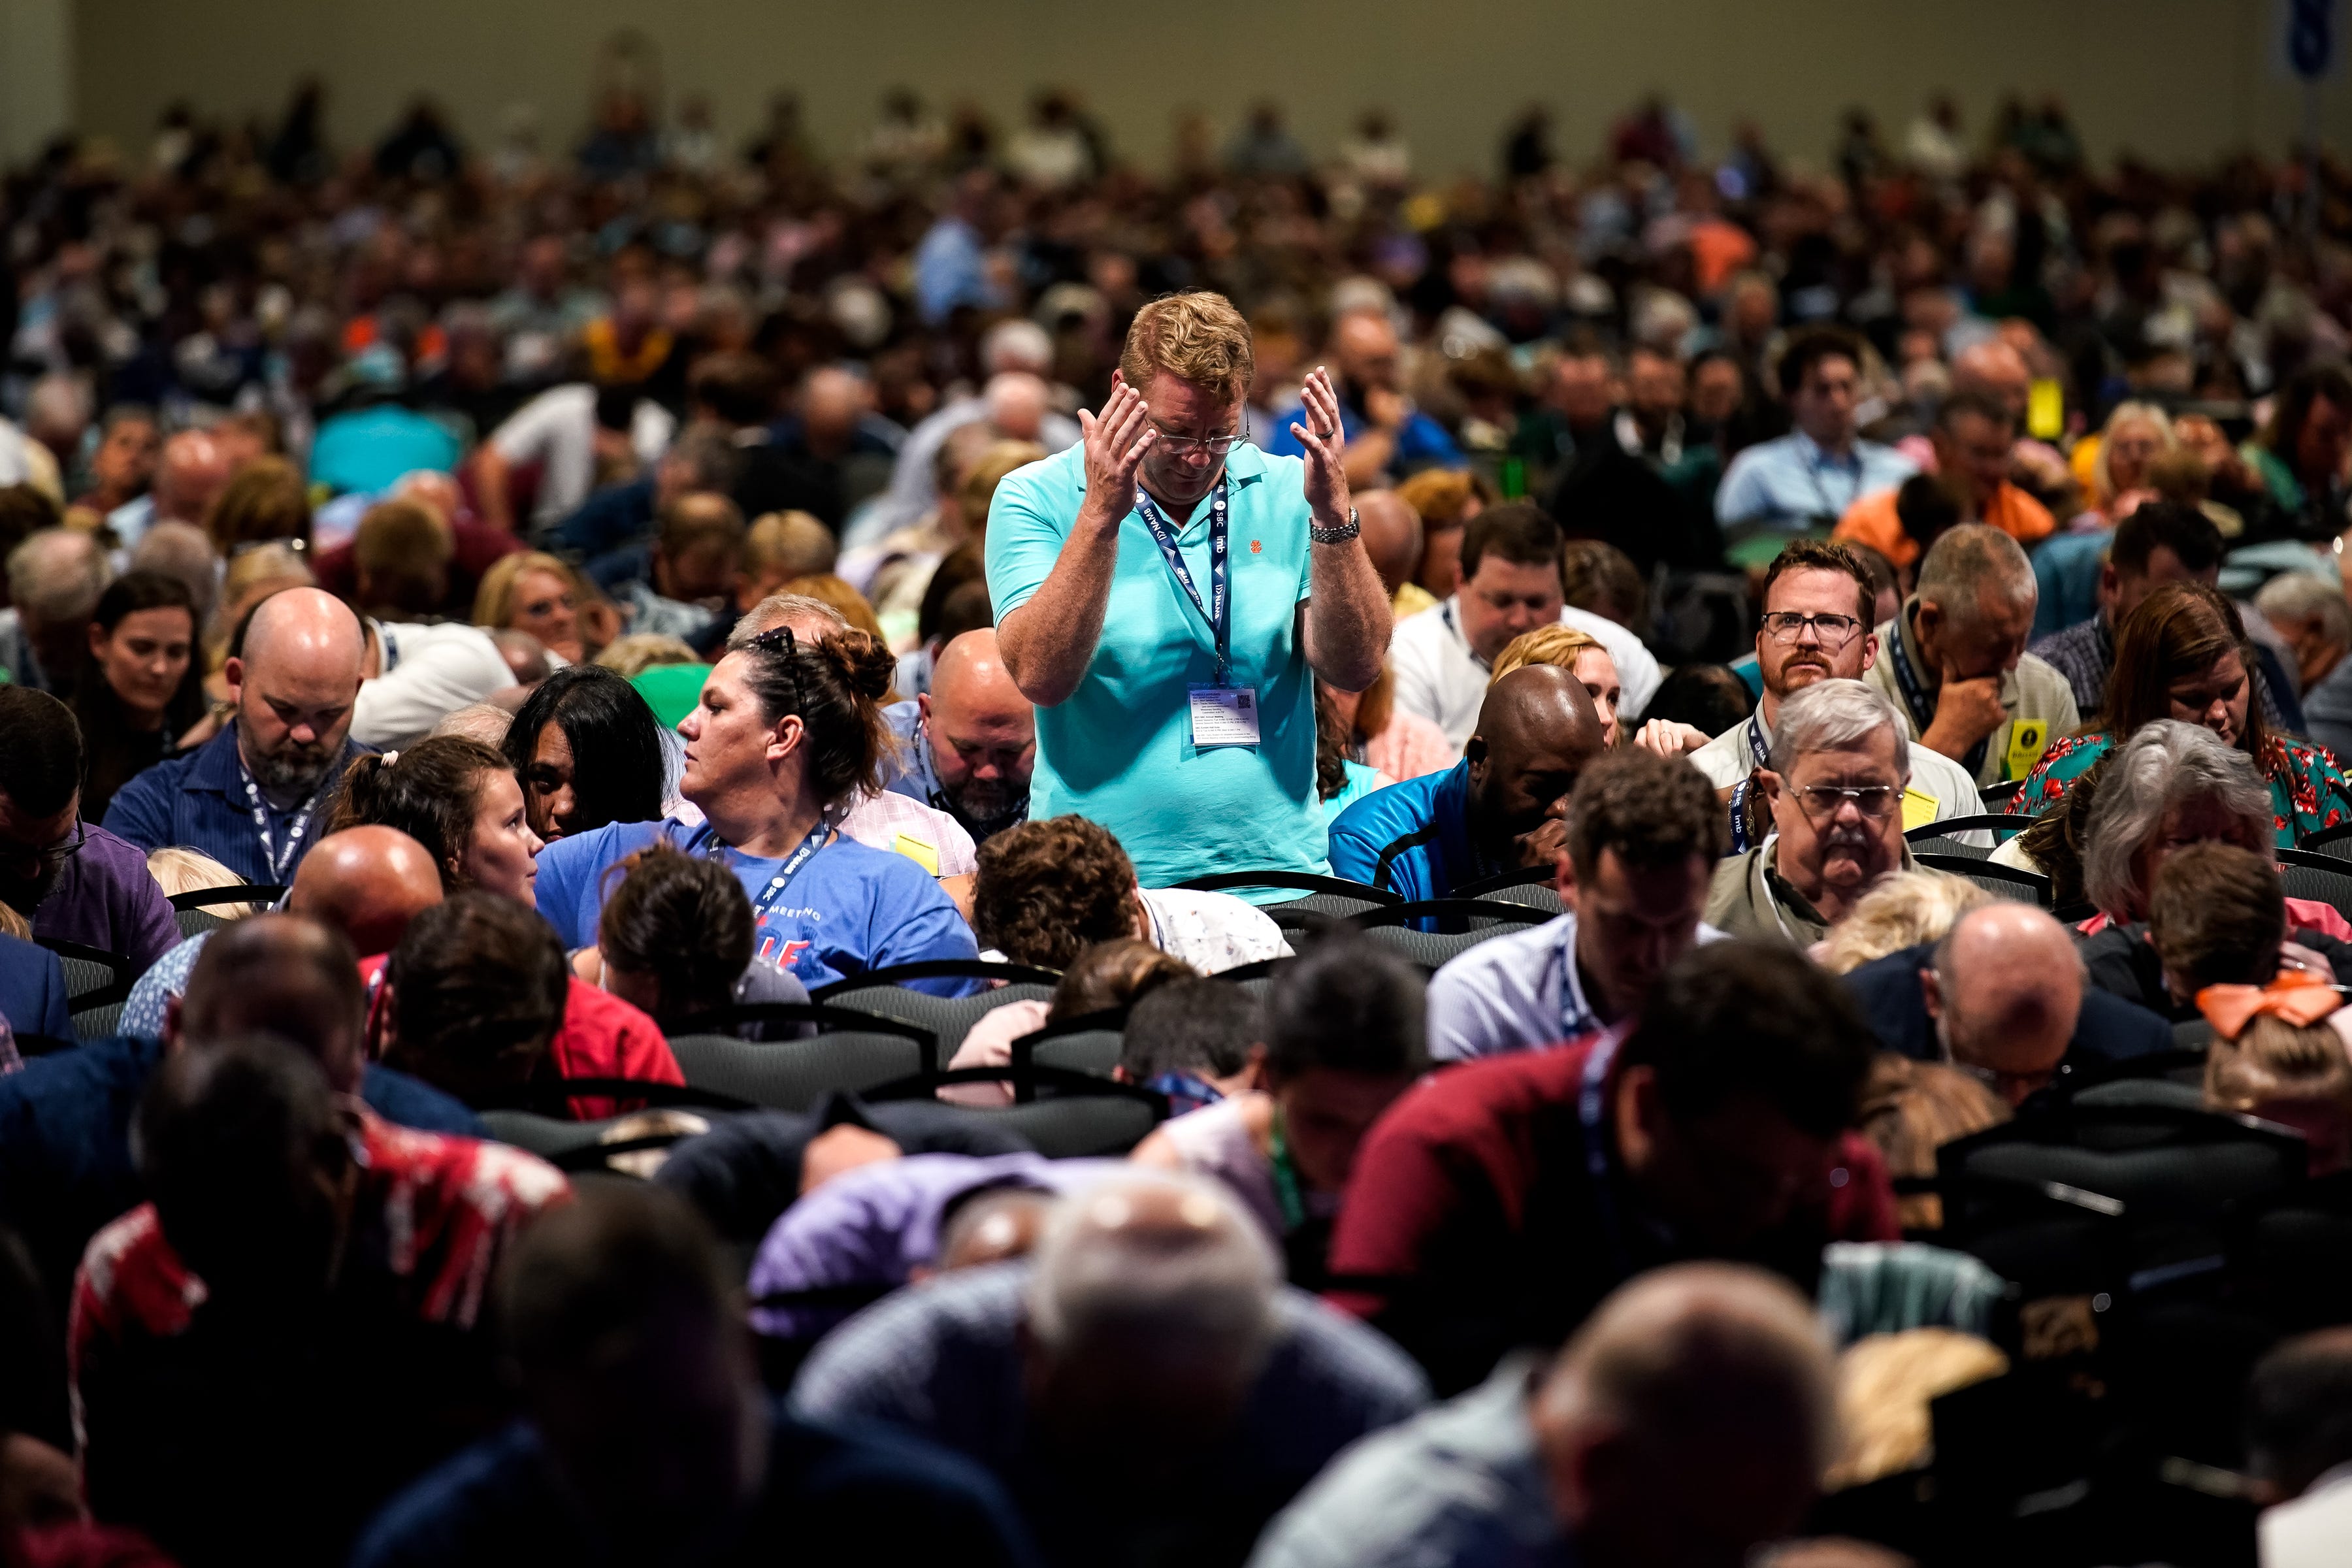 Southern Baptist Convention in Nashville What to know about event